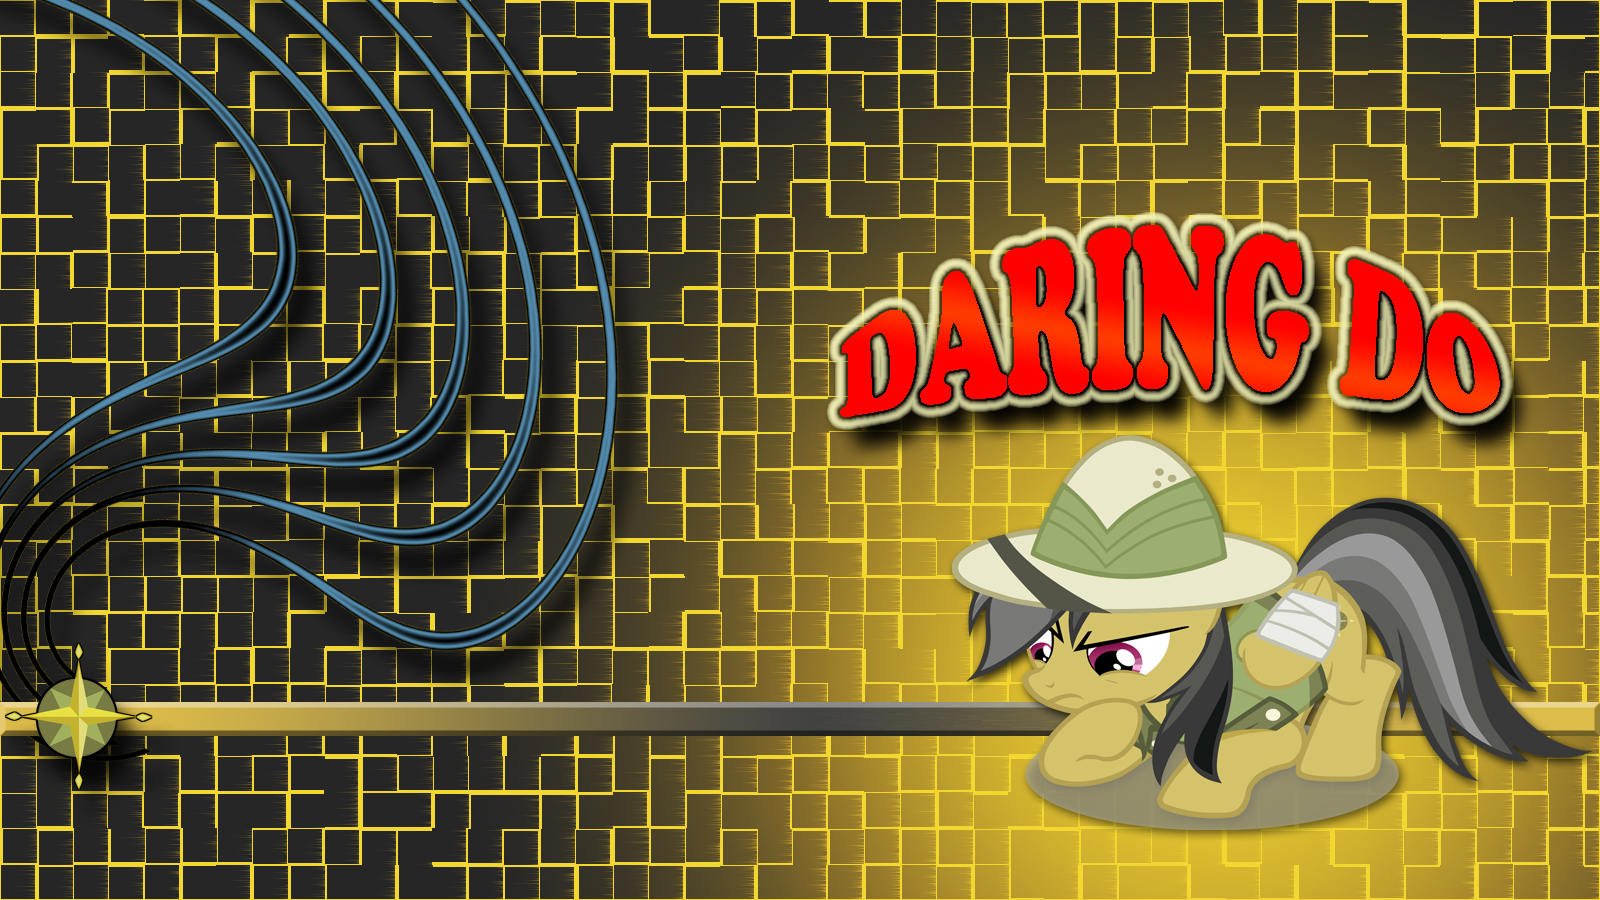 Daring do by ALoopyDuck